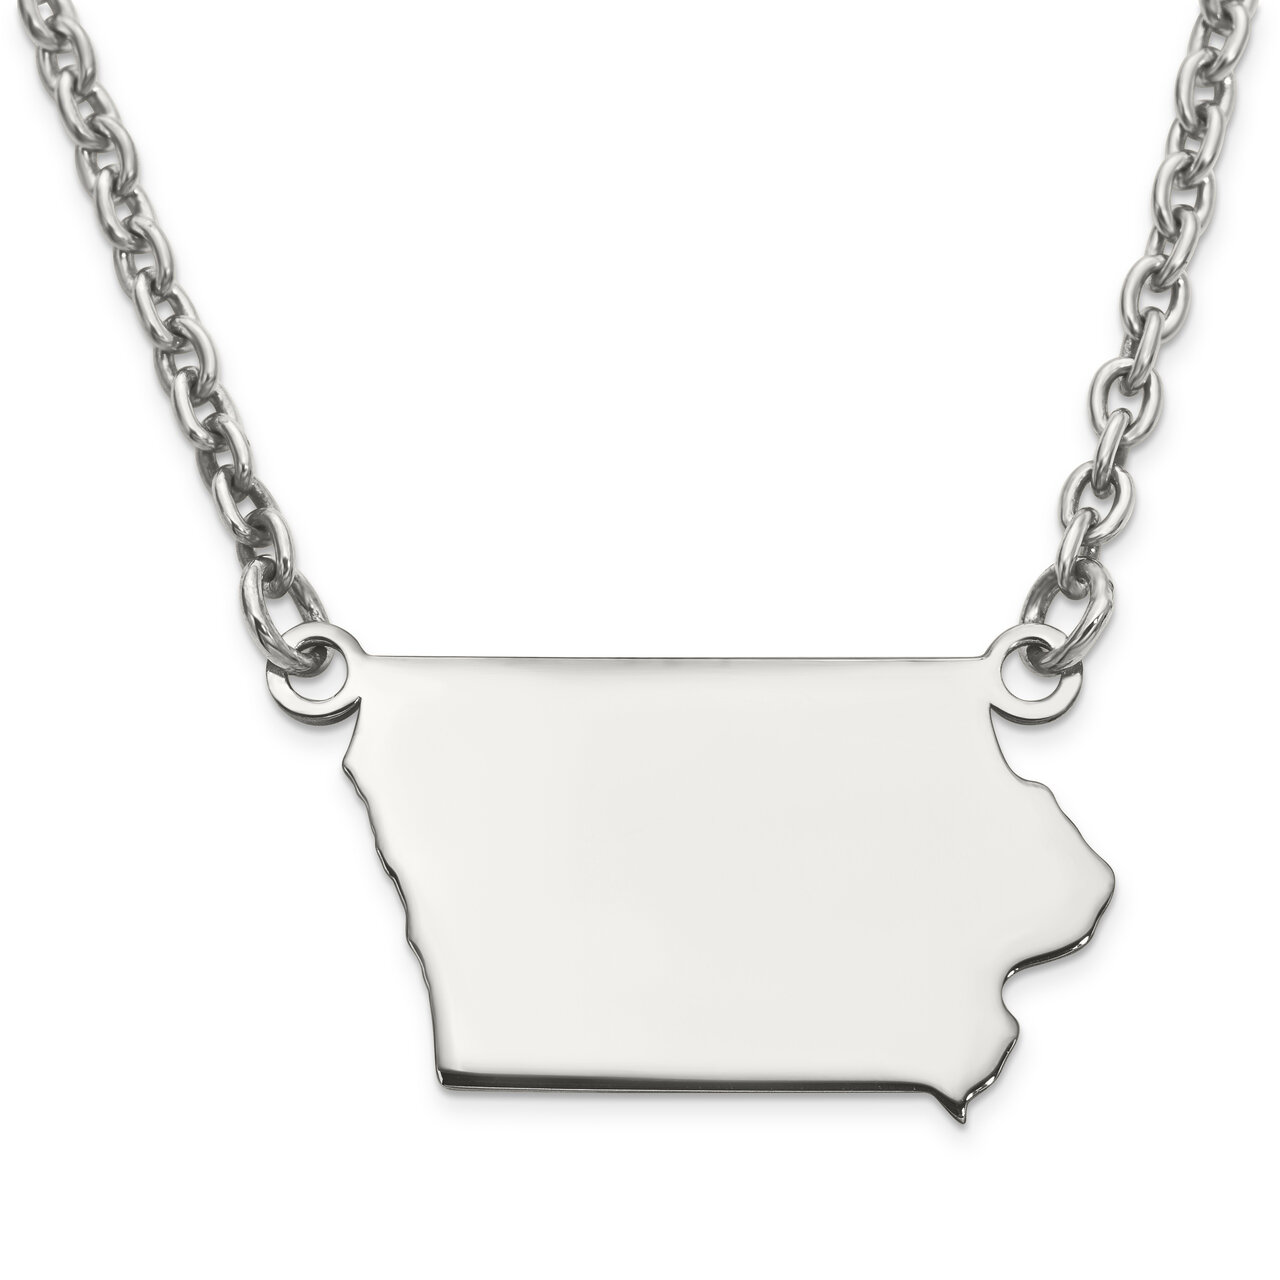 Iowa State Pendant Necklace with Chain 14k White Gold Engravable XNA706W-IA